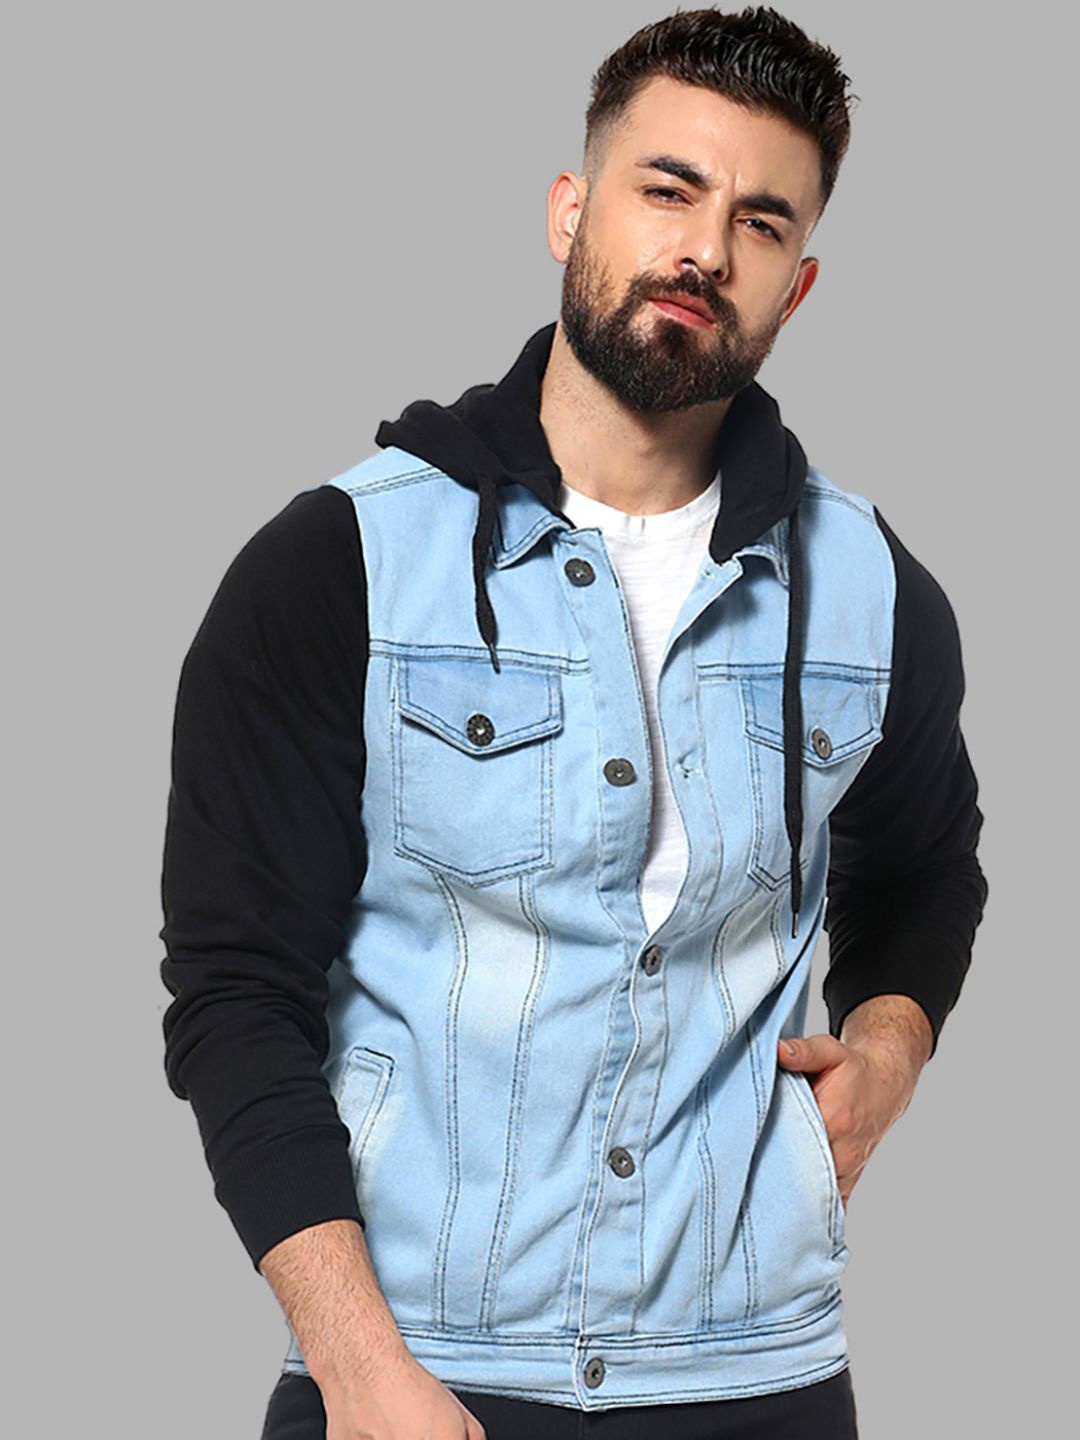 Campus Sutra Men Blue Outdoor Denim Jacket - buy at the price of $10.92 ...